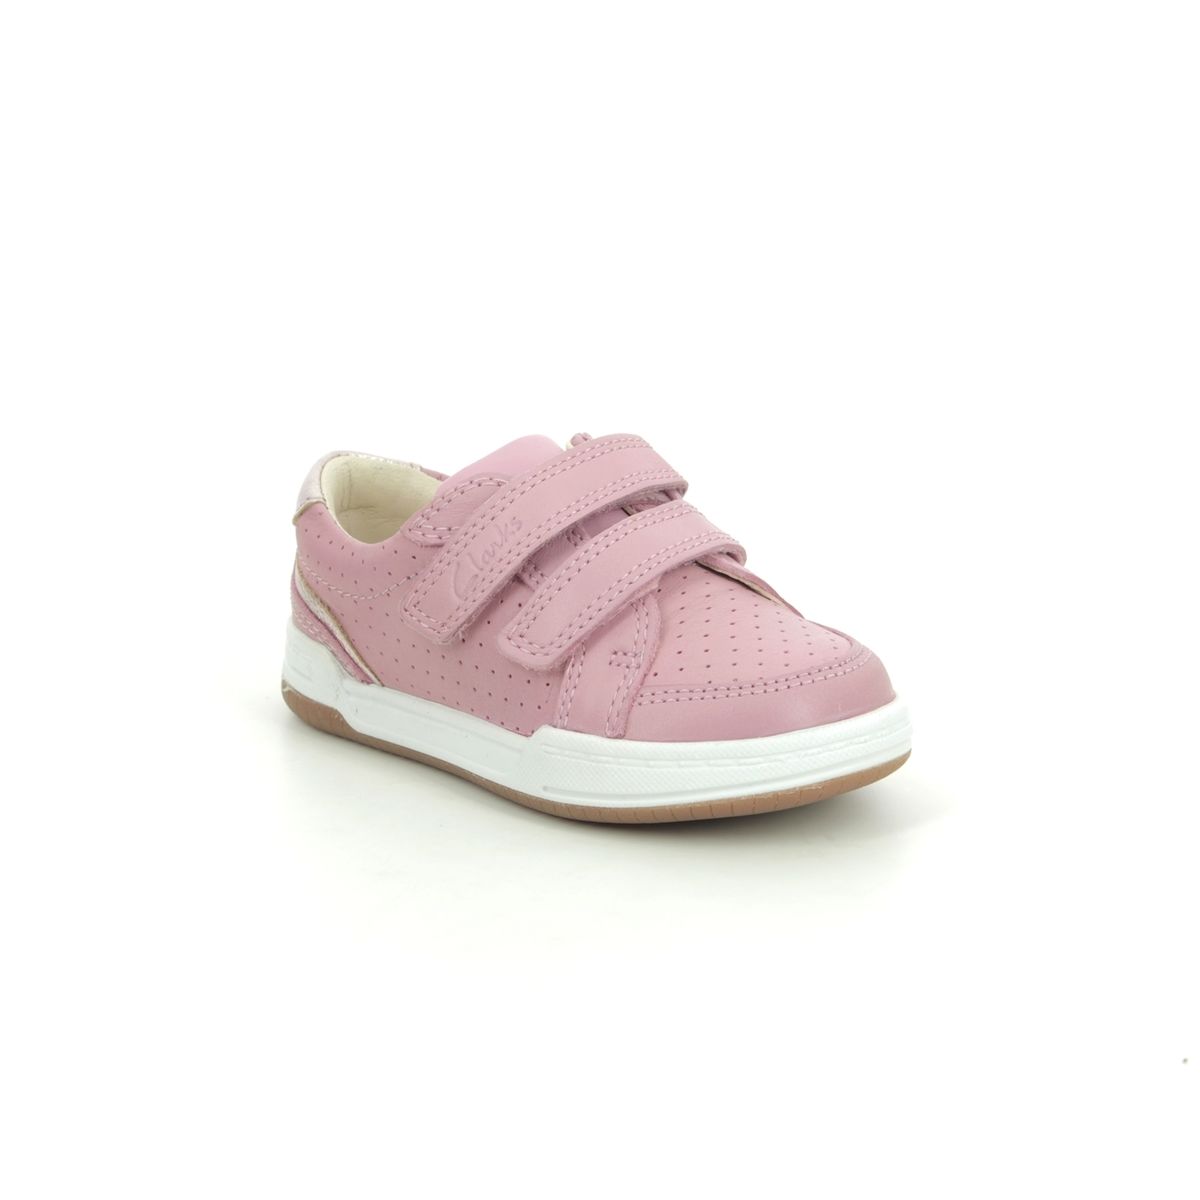 Clarks Fawn Solo T Pink Leather Kids First And Toddler 589896F In Size 5.5 In Plain Pink Leather F Width Fitting Regular Fit For kids